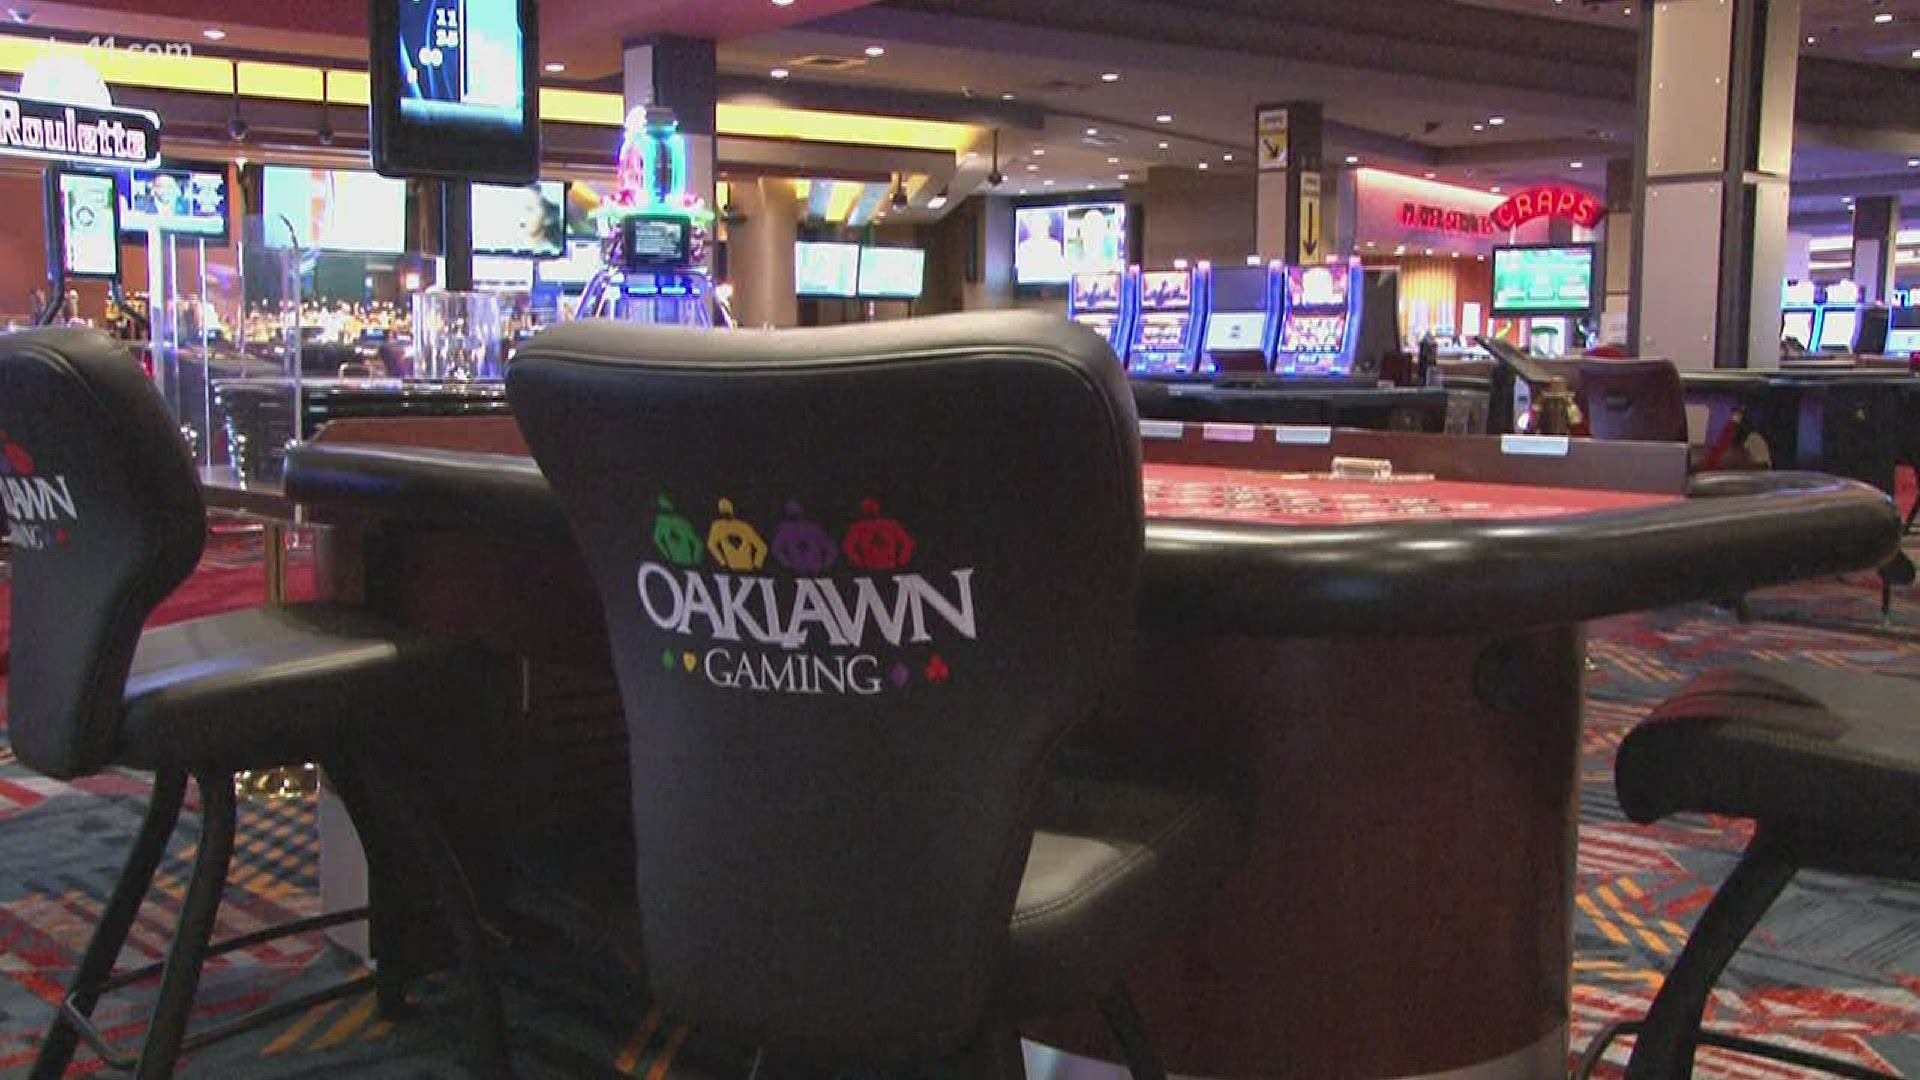 Oaklawn set to reopen casino on May 18th, requiring guests to wear